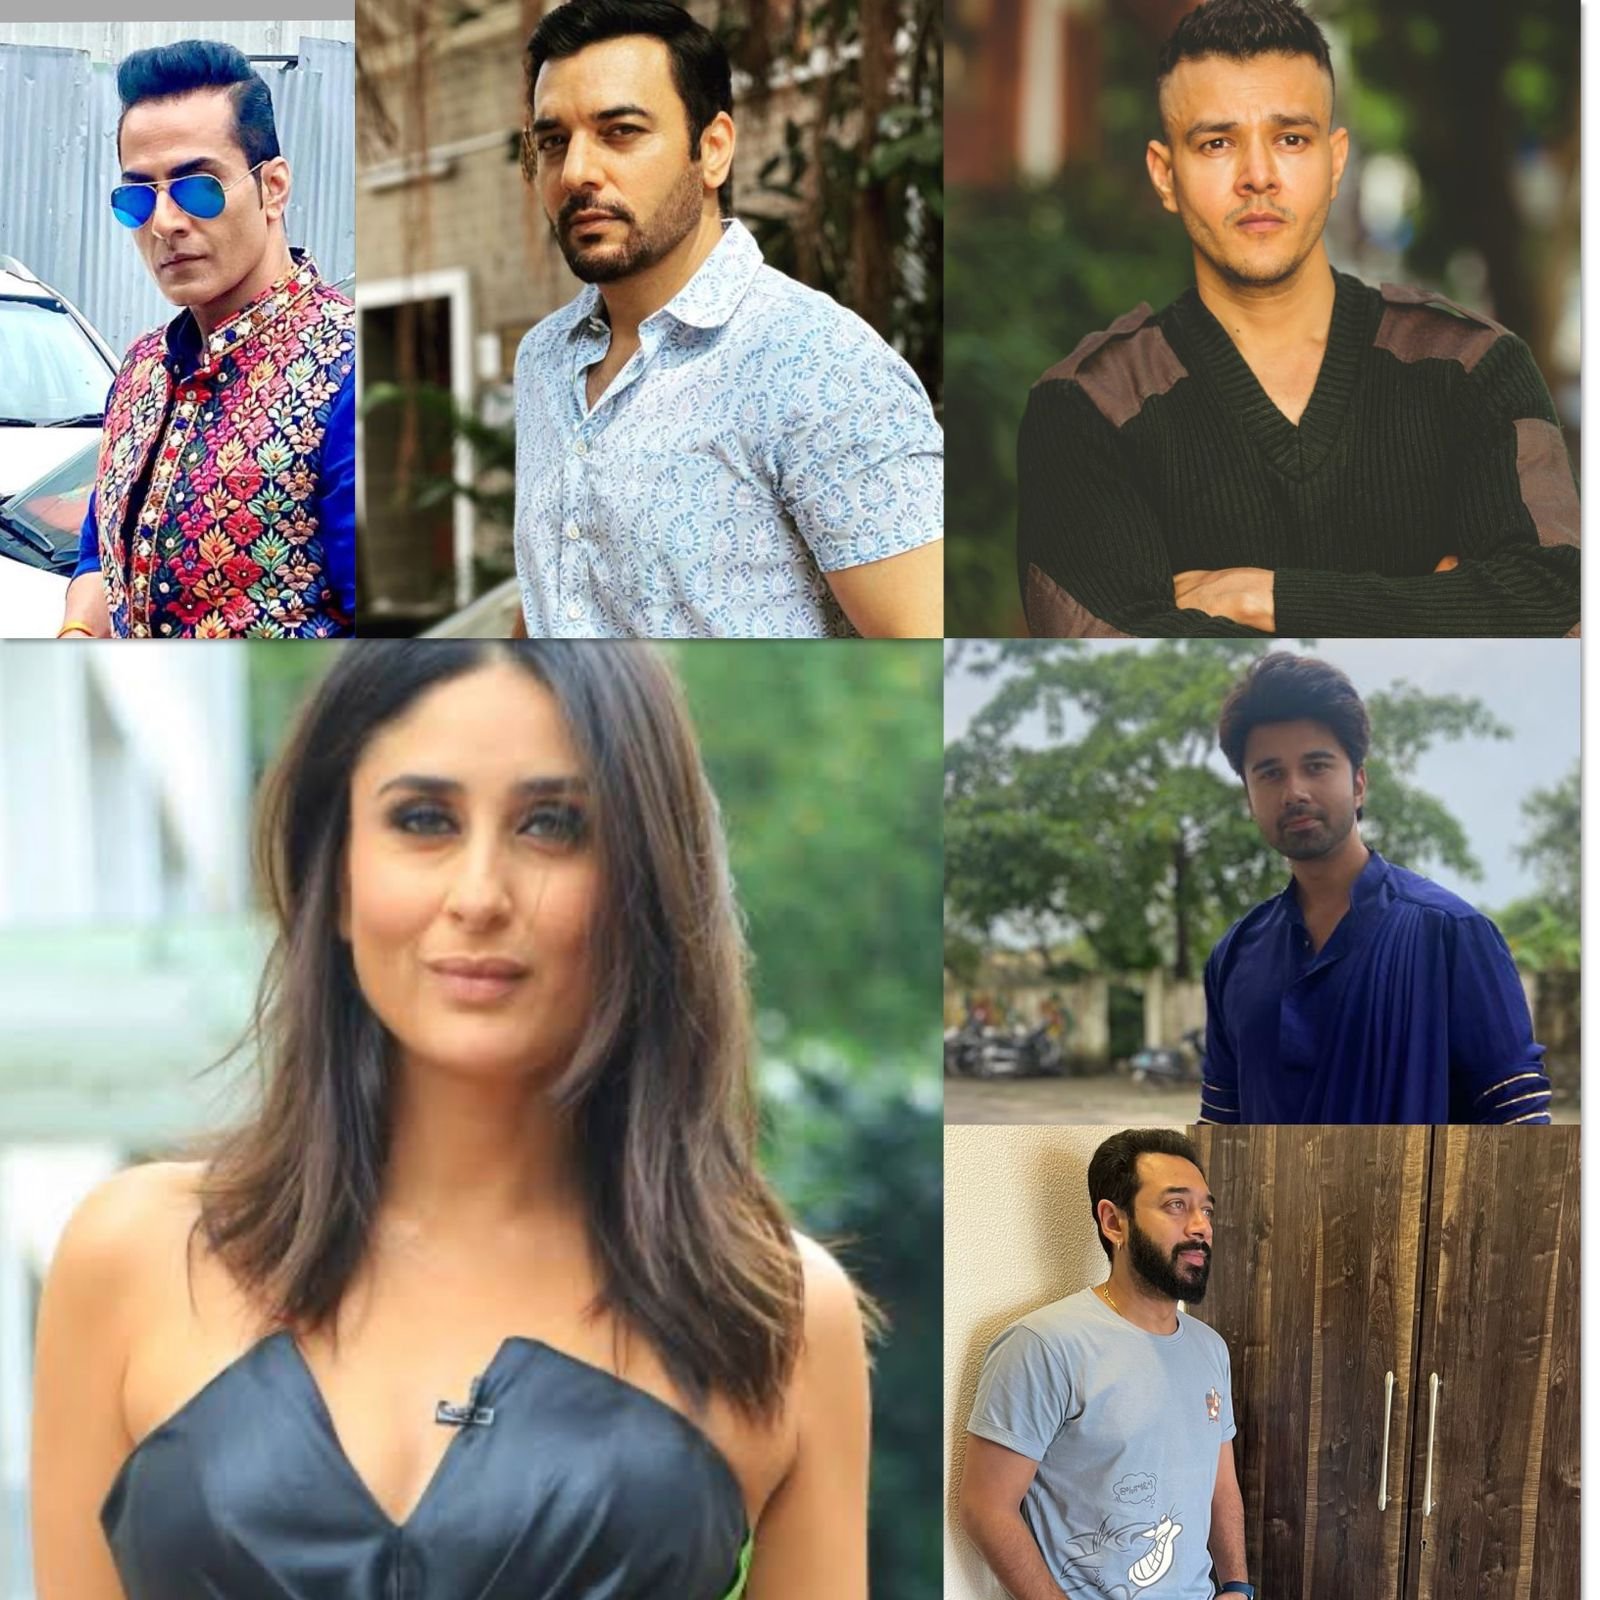 You are currently viewing Kareena Kapoor Khan’s latest video raises questions on whether fans at times wrongly invade celeb privacy: Actors share their viewpoint!